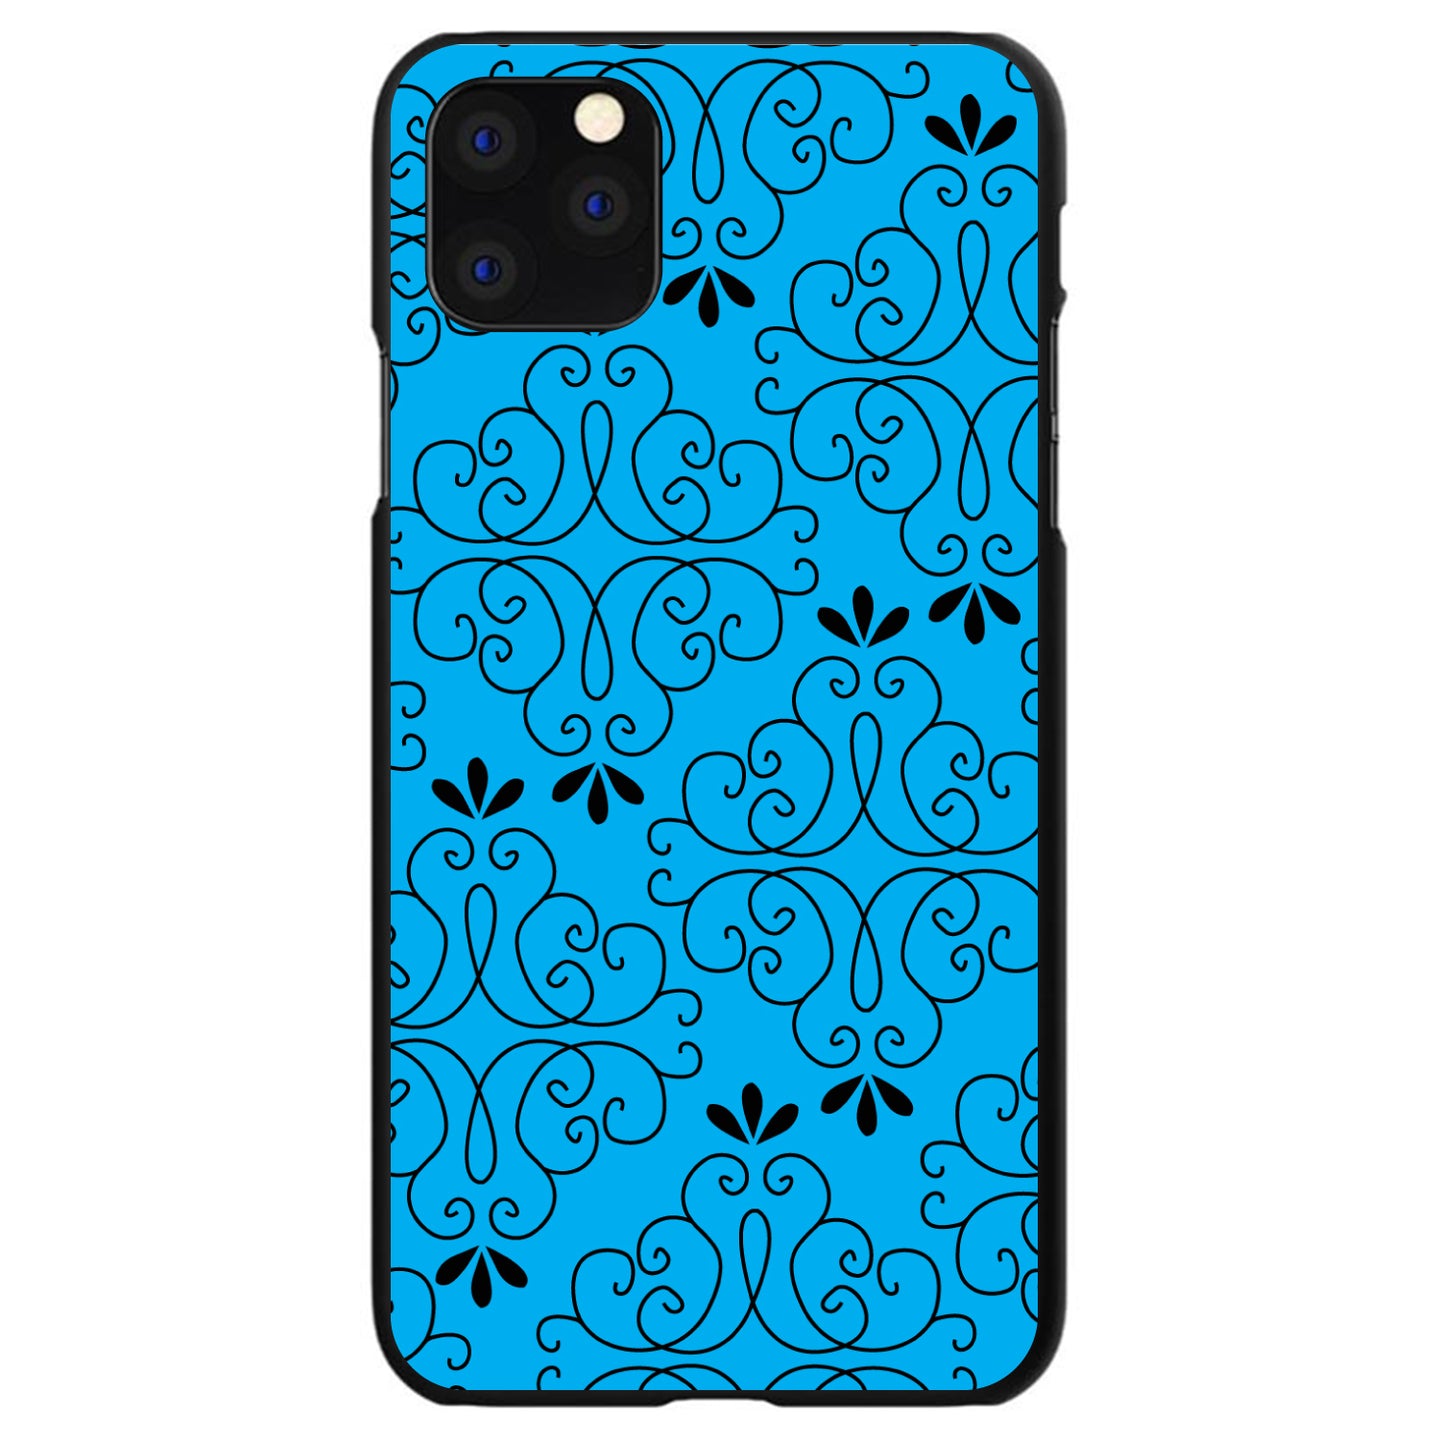 DistinctInk® Hard Plastic Snap-On Case for Apple iPhone or Samsung Galaxy - Blue Black Floral Pattern